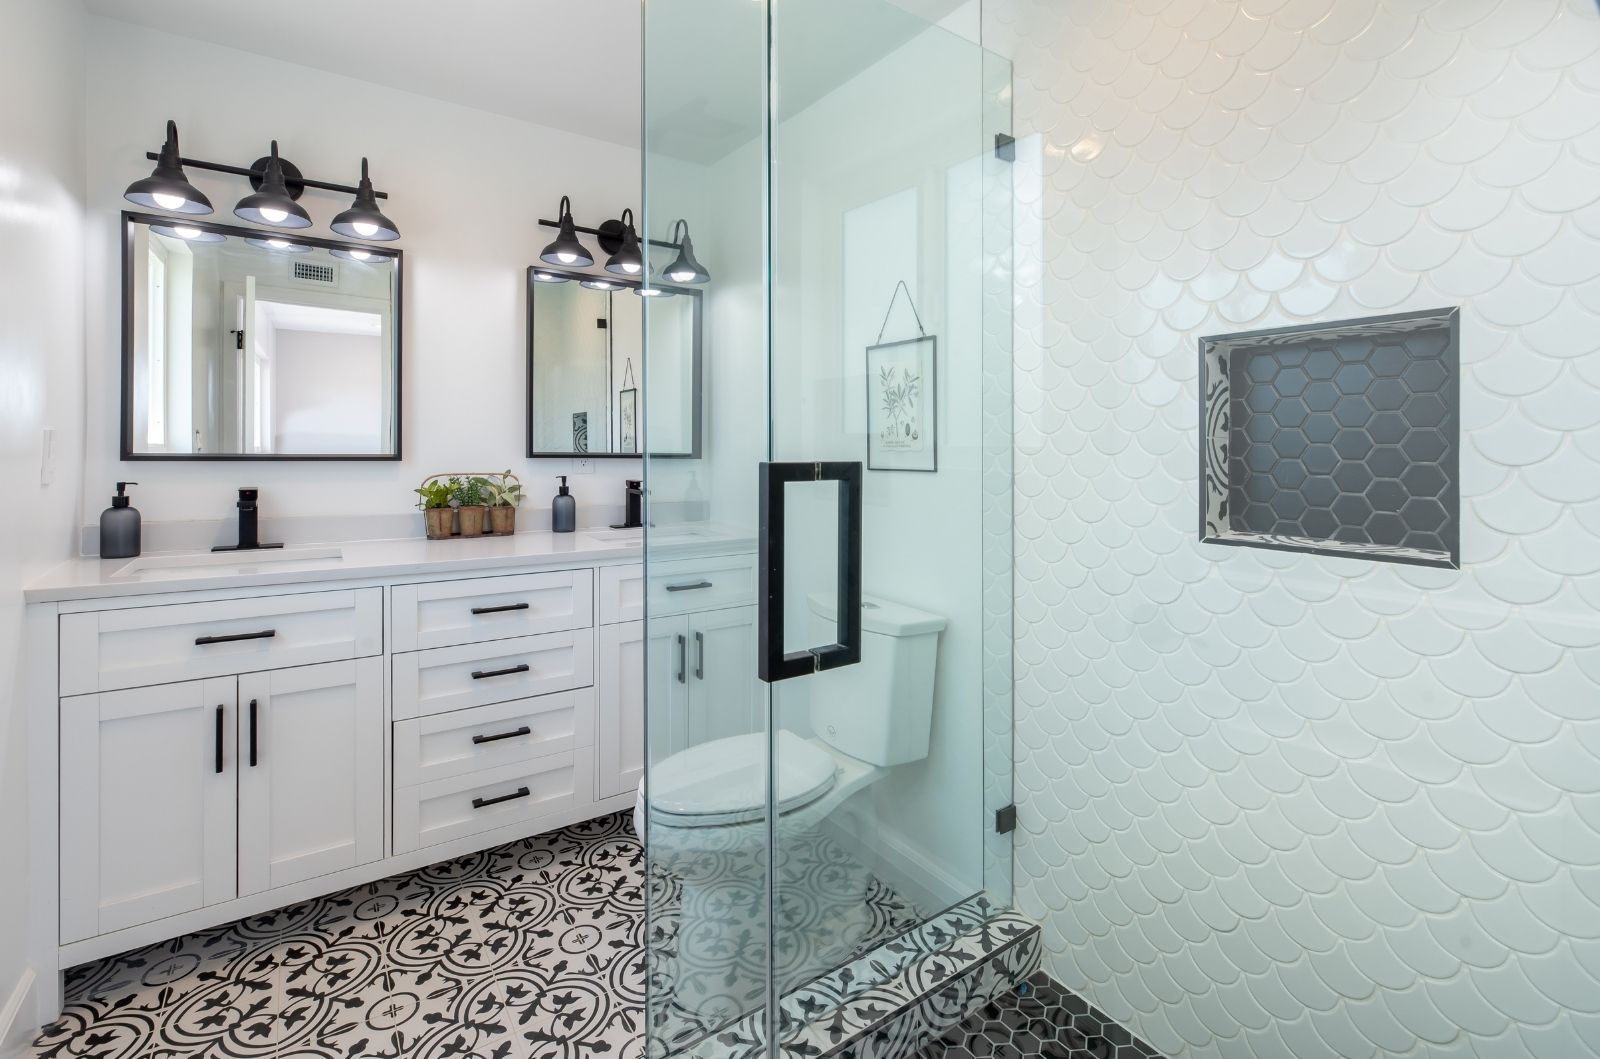 Bathroom remodeling in Miami: Renovating and installing new cabinets